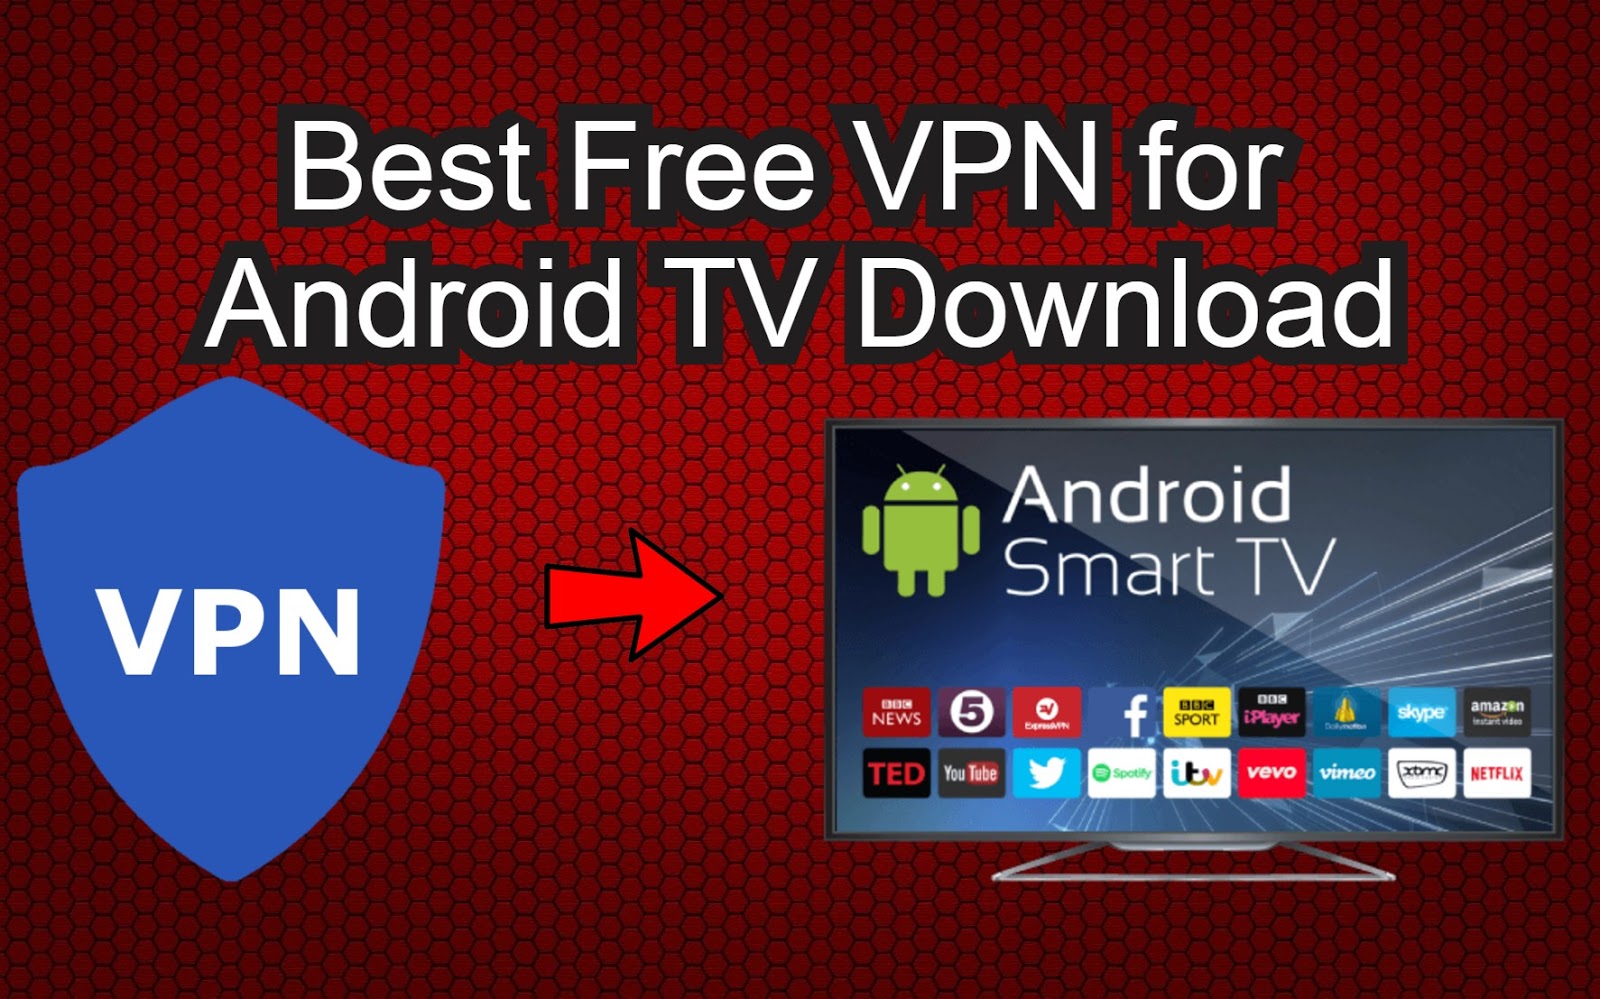 Best Free VPN for Android TV Box